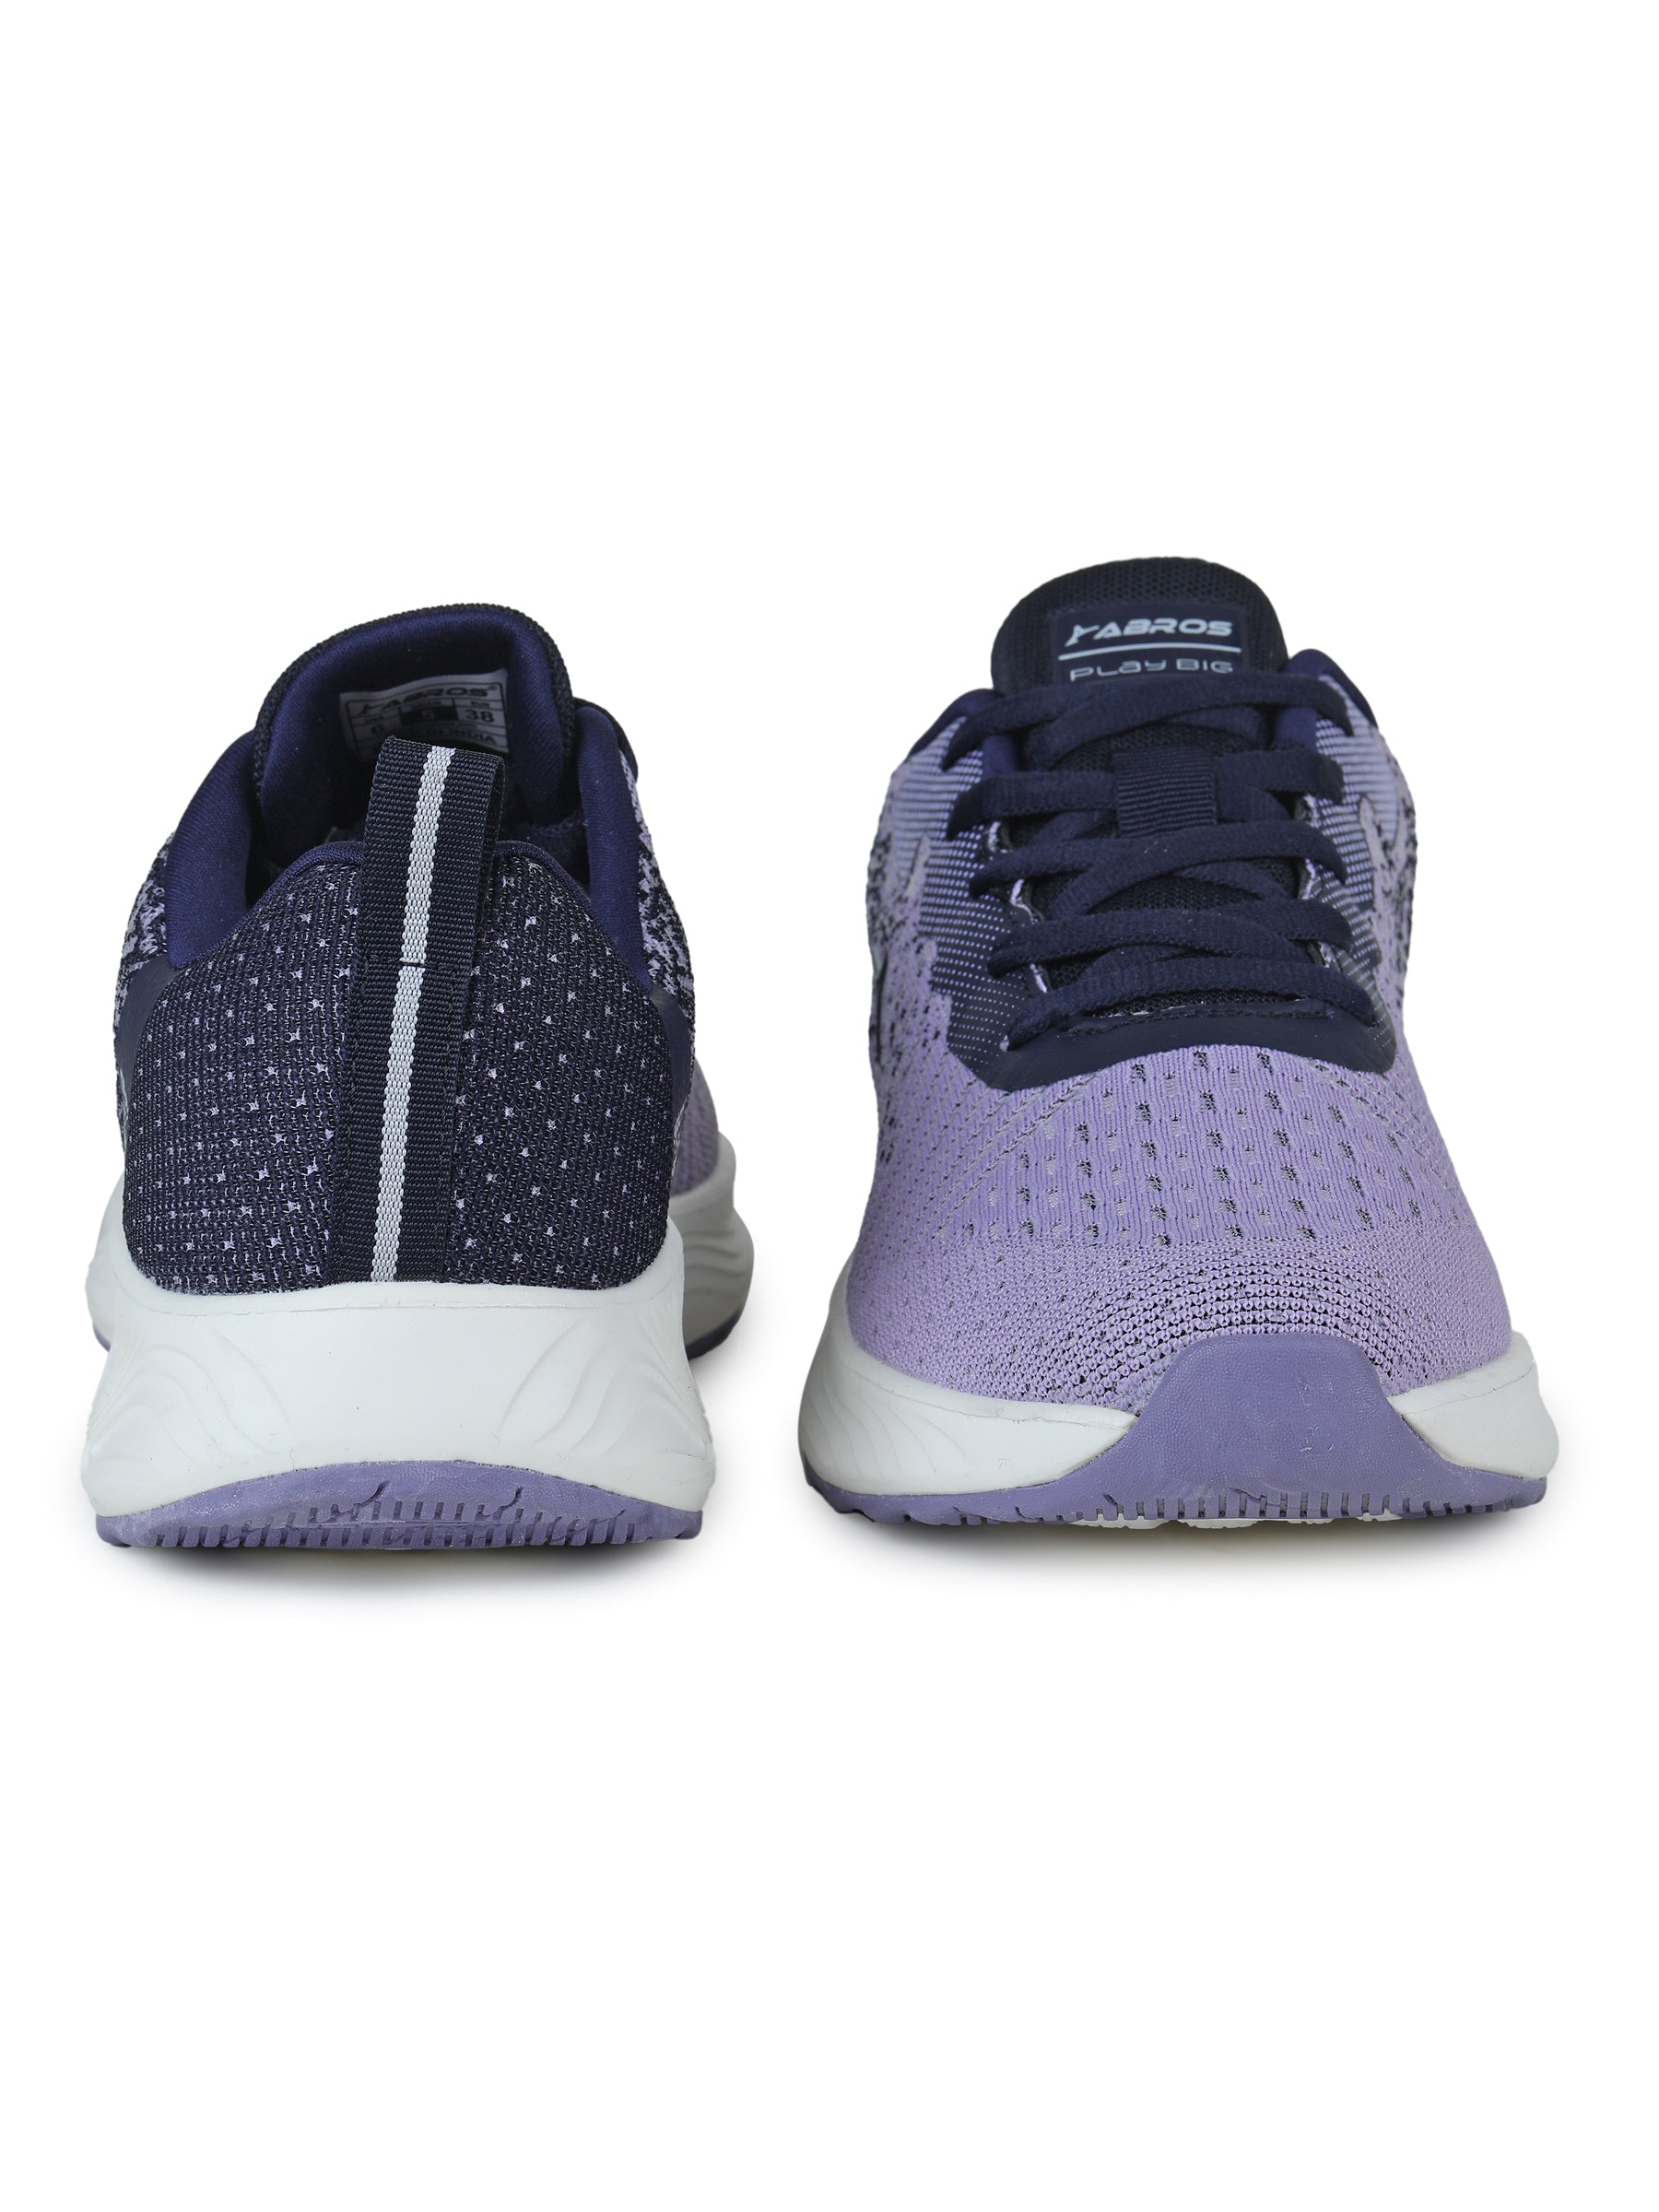 WILLOW SPORTS SHOES FOR WOMEN